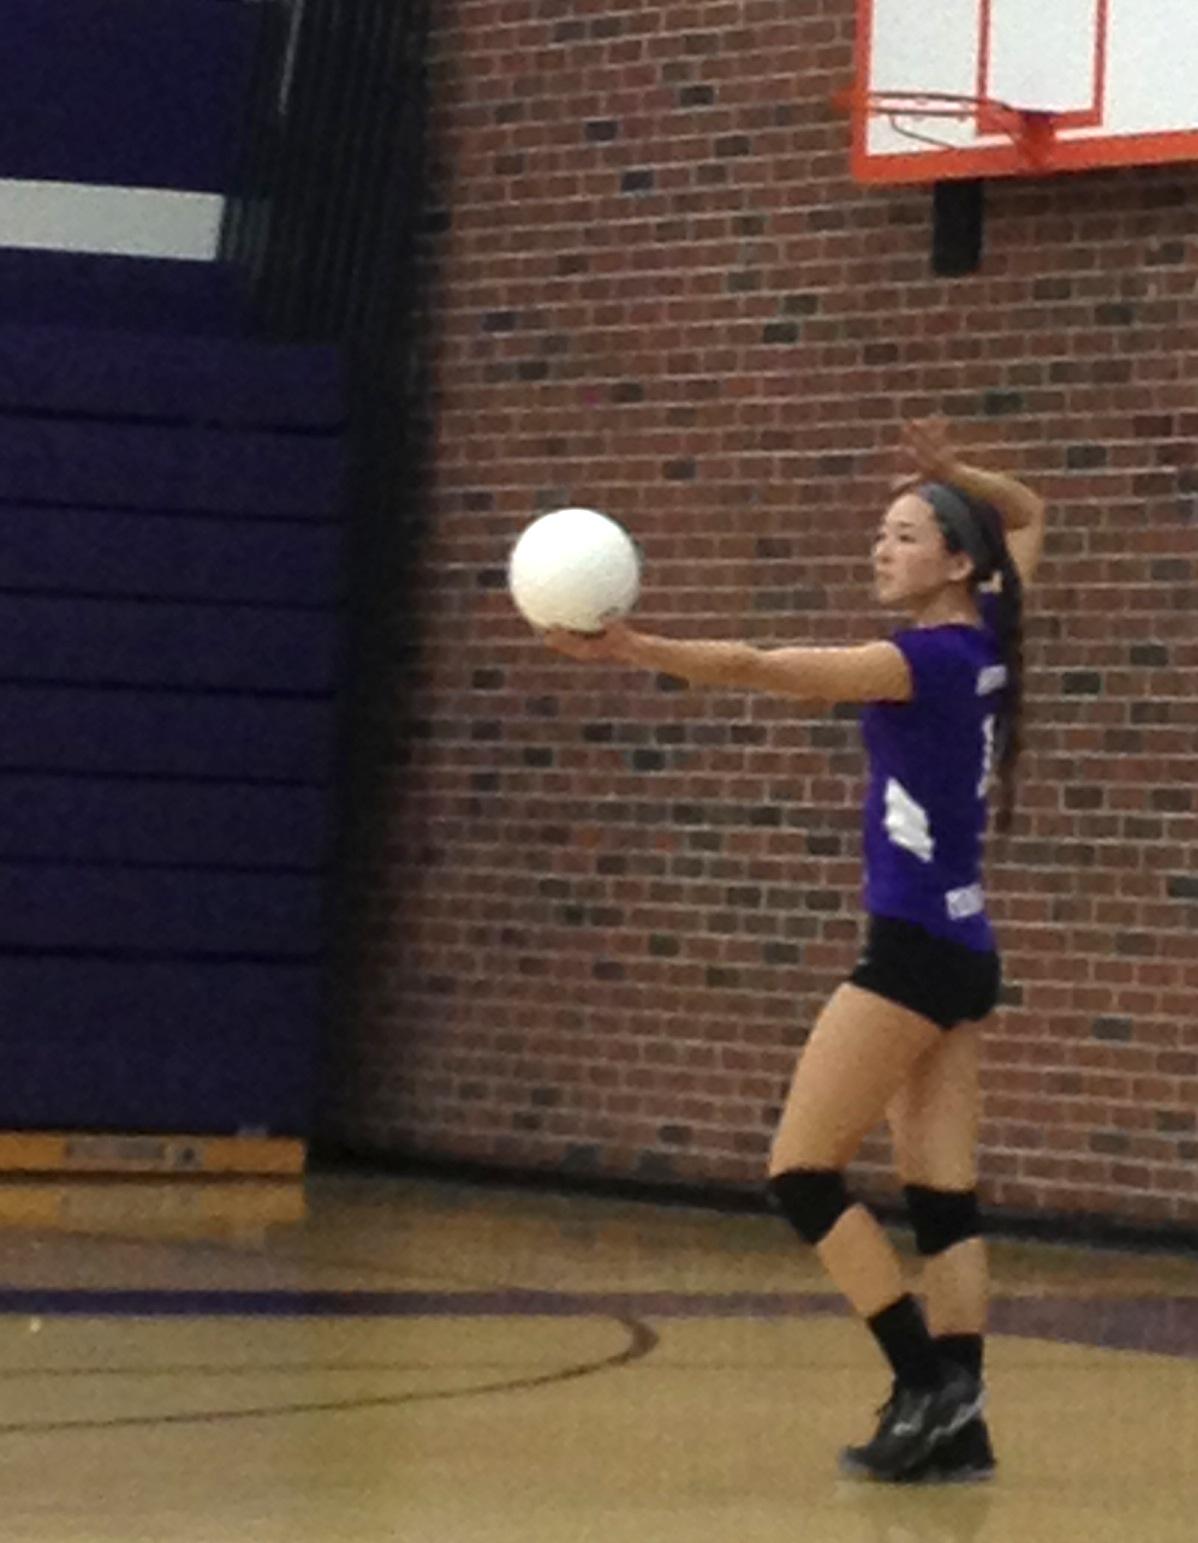 Sophomore Sydney Howard serves the ball for a point. The final score of the match was 3-1.